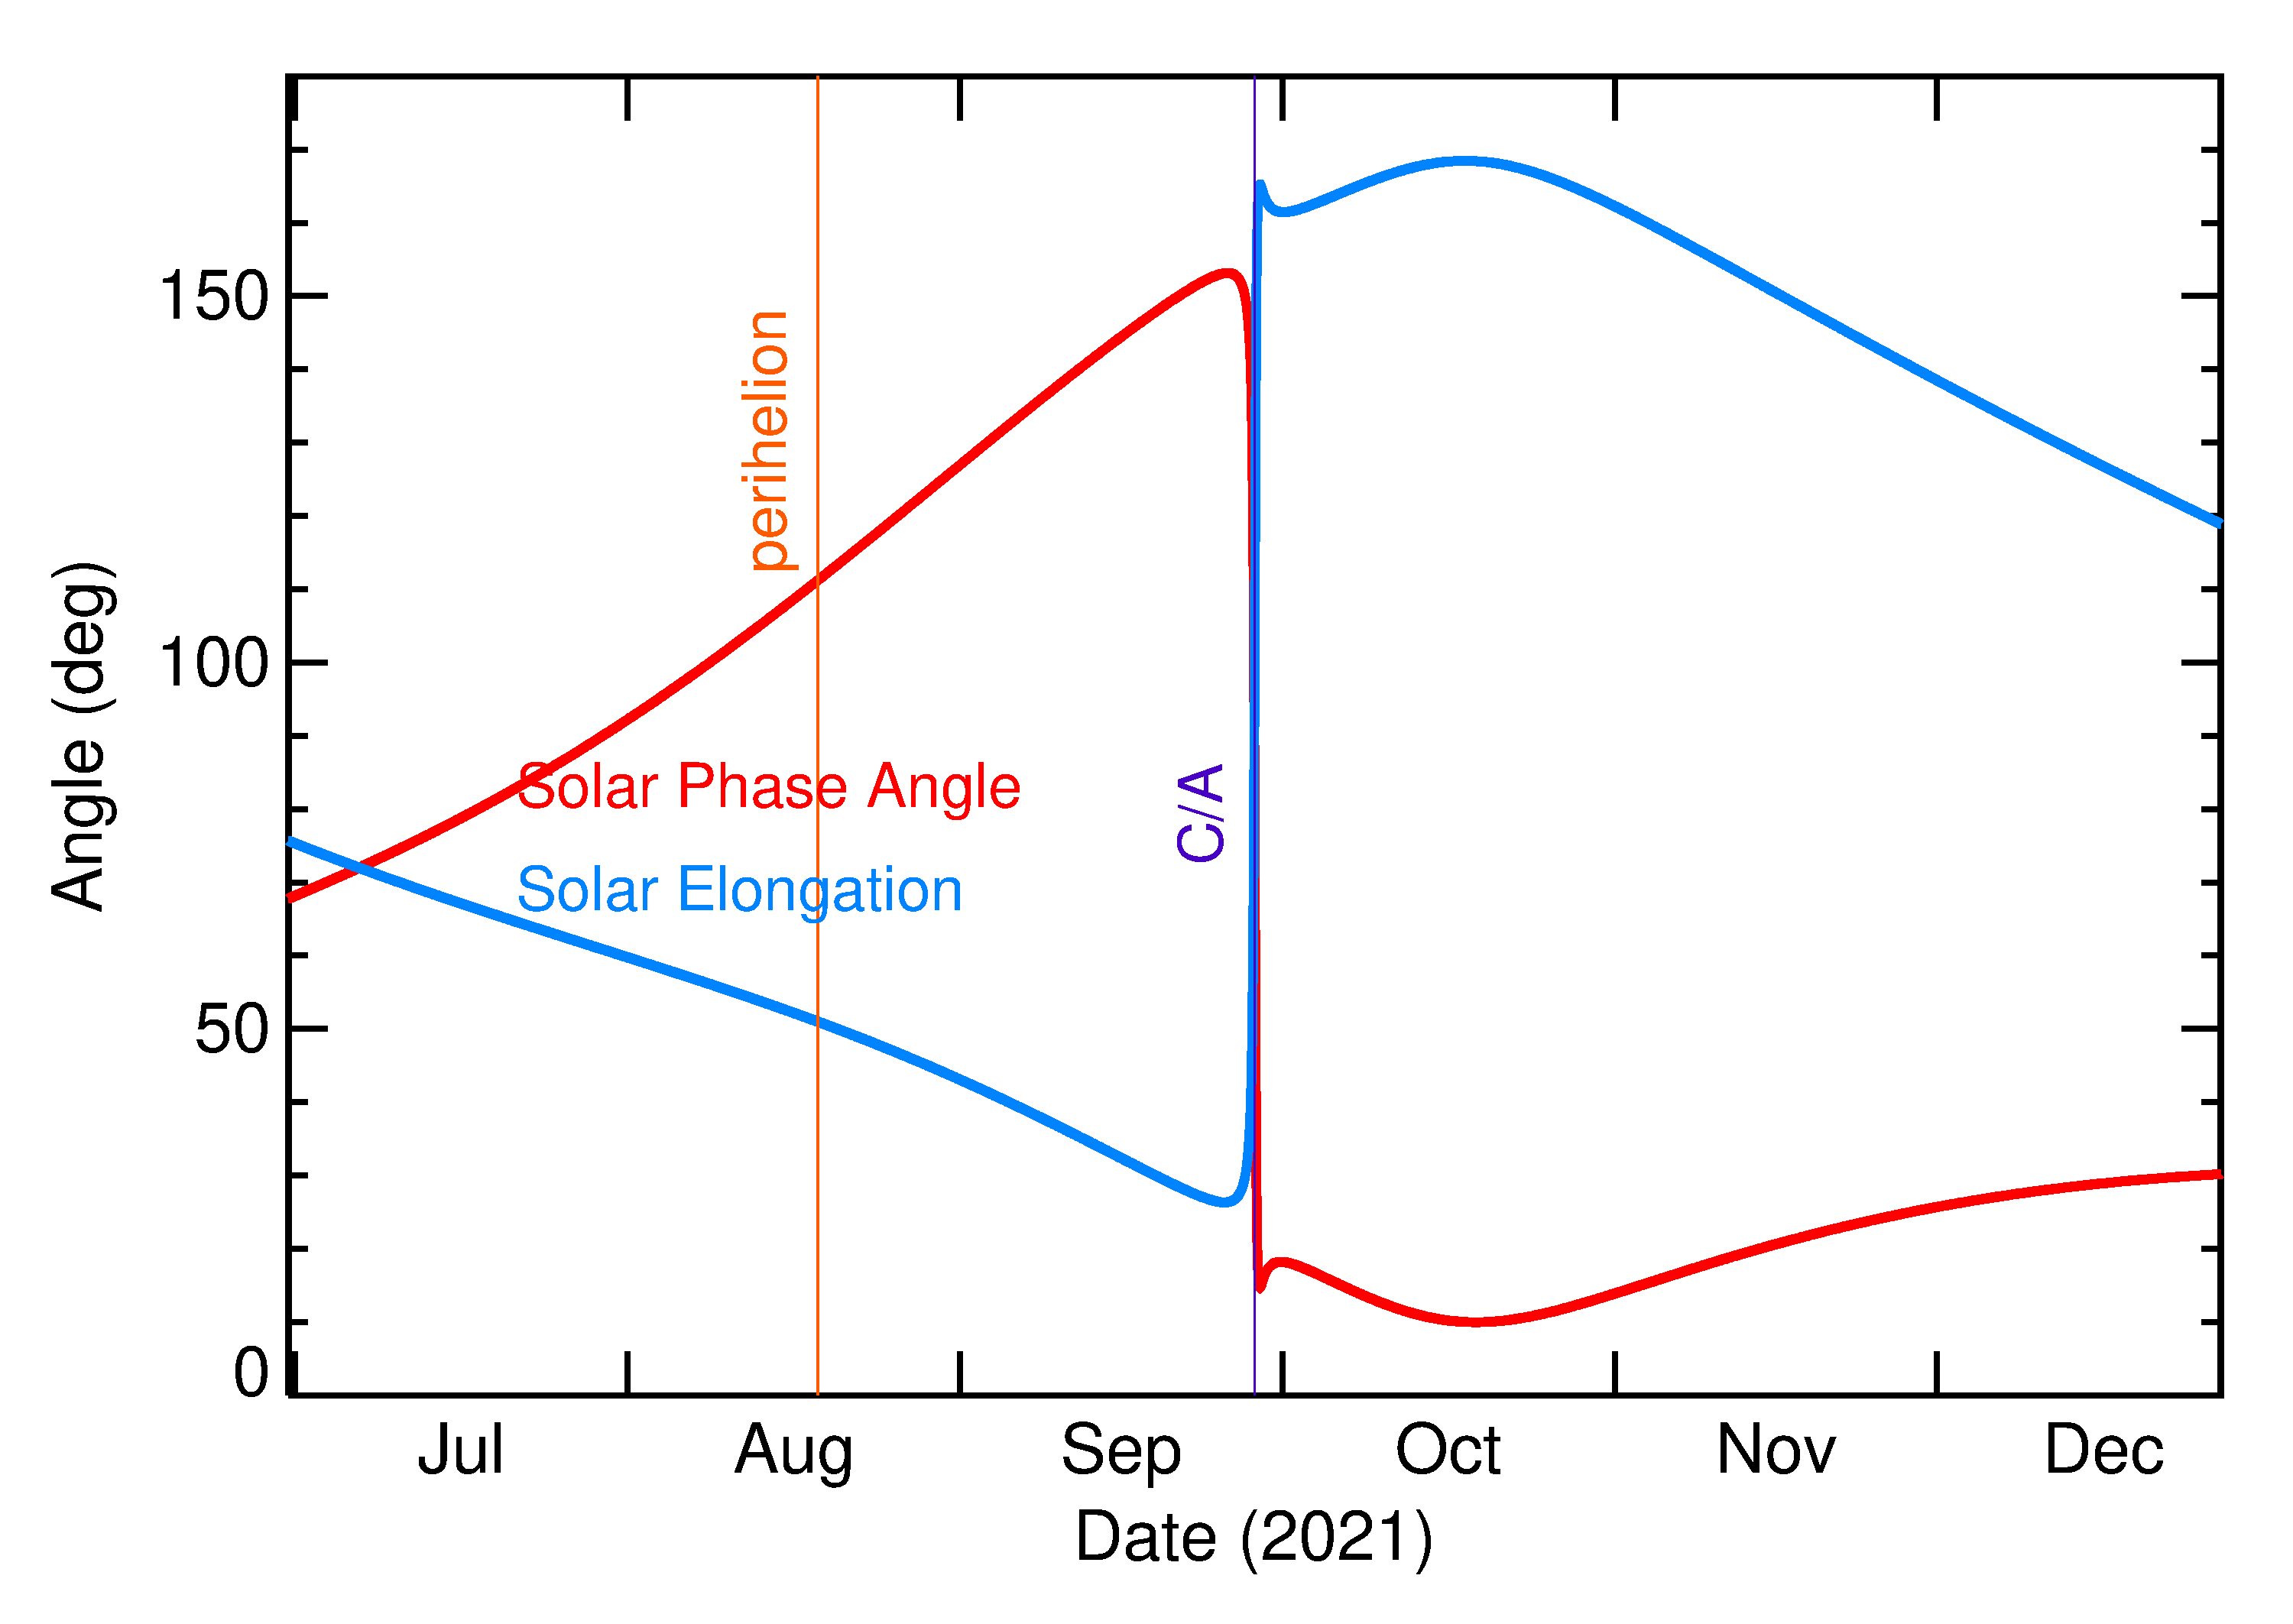 Solar Elongation and Solar Phase Angle of 2021 SQ1 in the months around closest approach